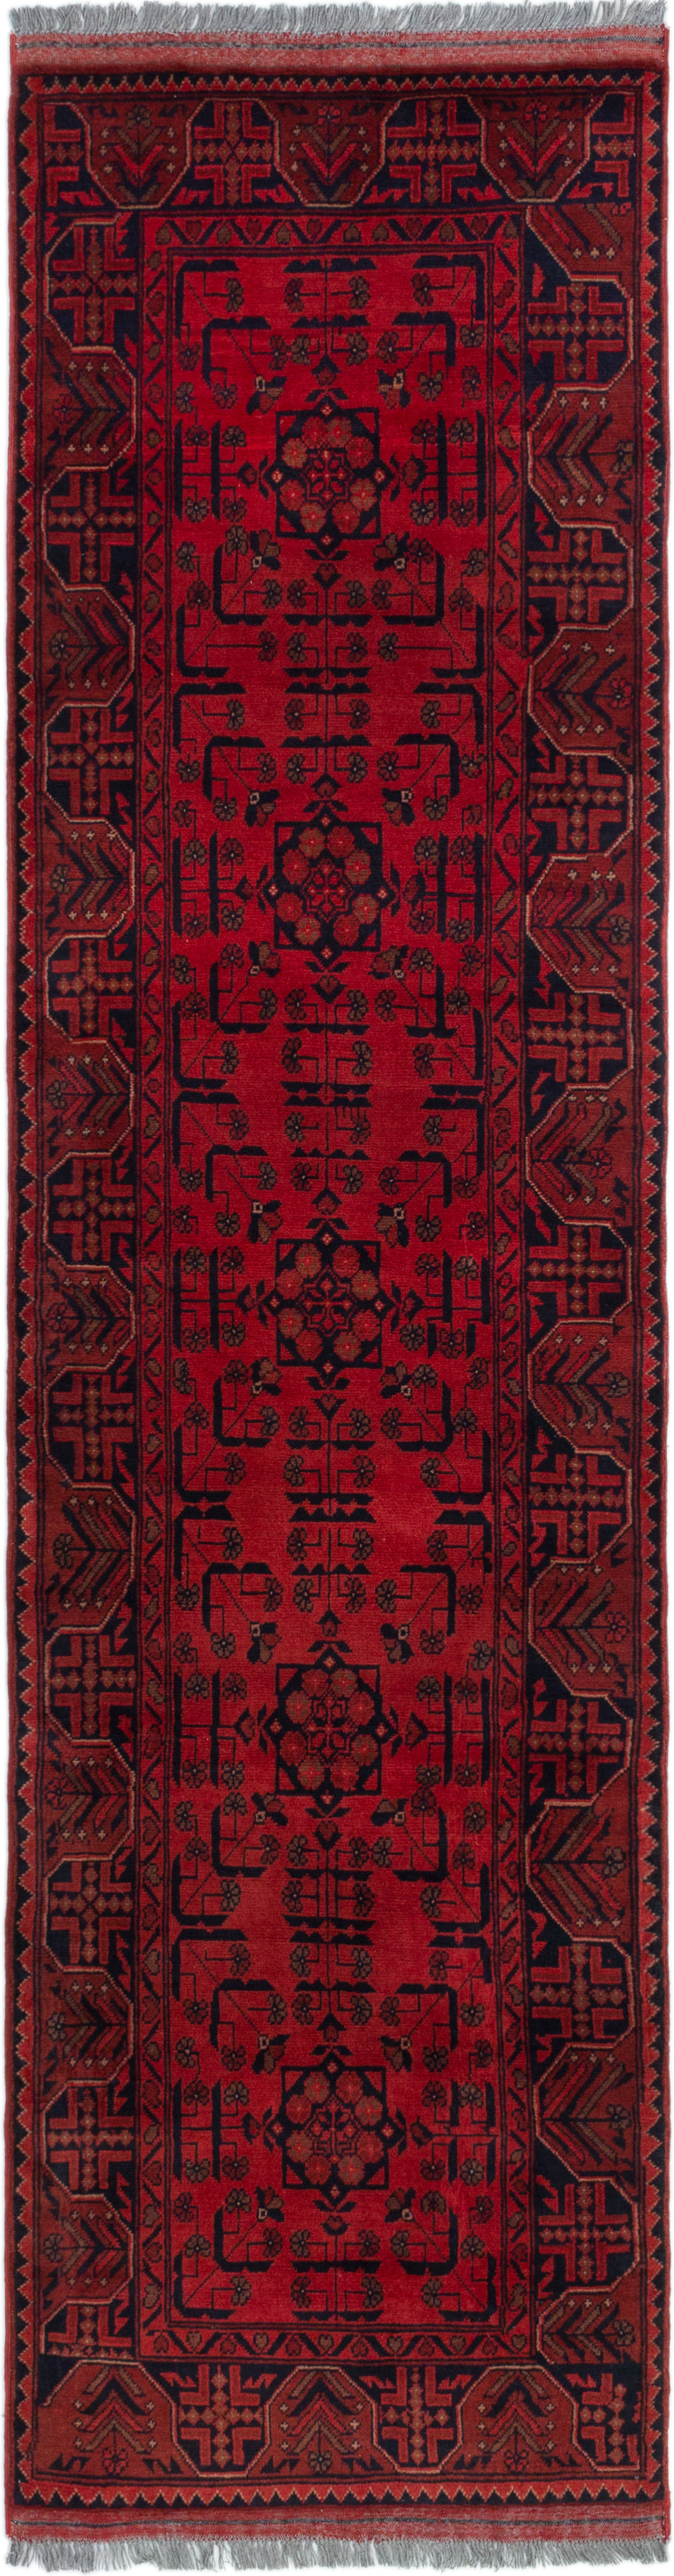 Hand-knotted Finest Khal Mohammadi Red Wool Rug 2'10" x 9'7"  Size: 2'10" x 9'7"  